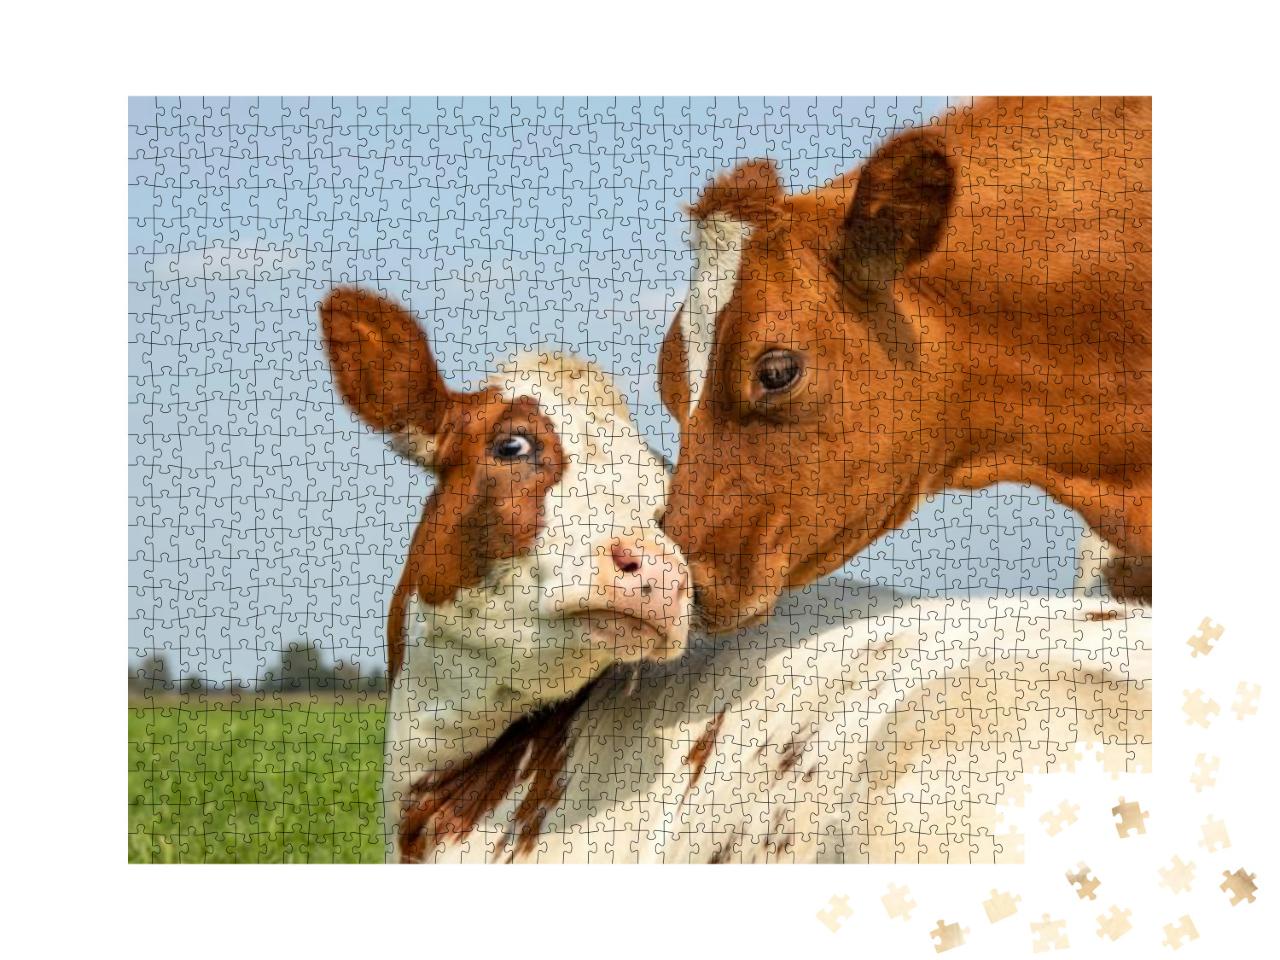 Cow Playfully Cuddling Another Young Cow Lying Down in a... Jigsaw Puzzle with 1000 pieces